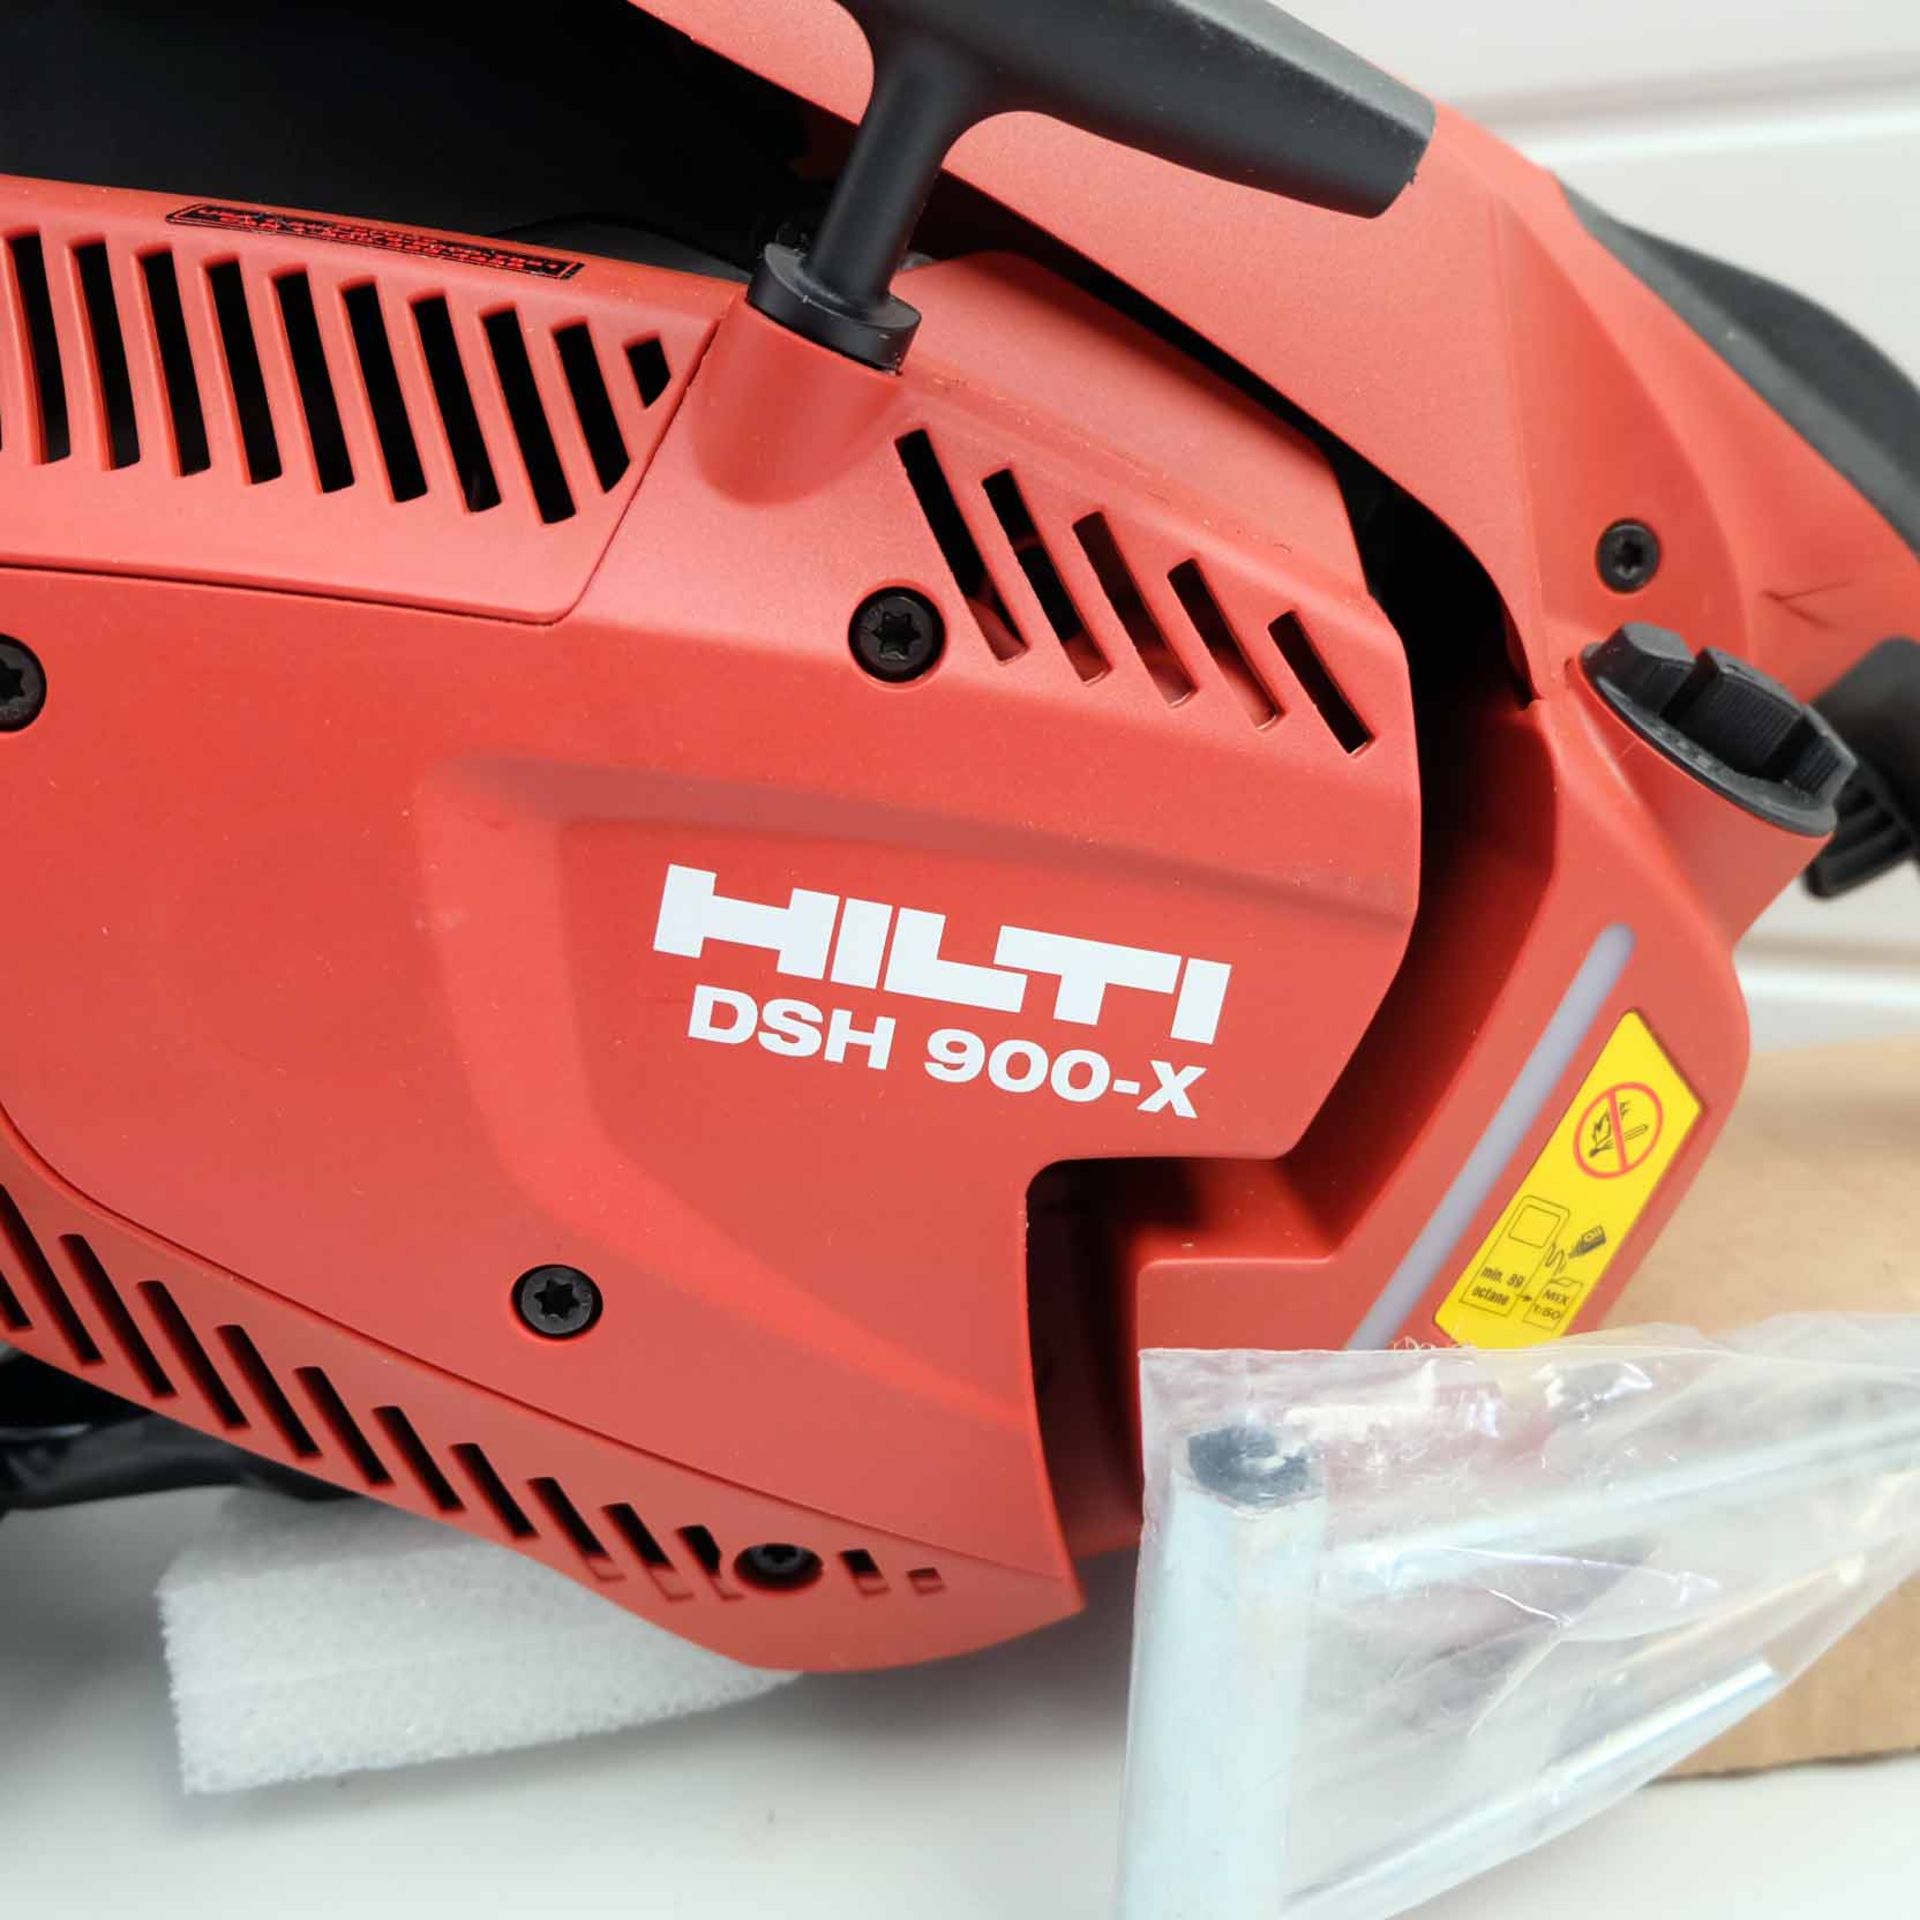 Hilti Hand Held Gas Saw. Model DSH 900-X 16". Complete With SP-16"x1" Blade. Easy Start Auto-Choke S - Image 8 of 25